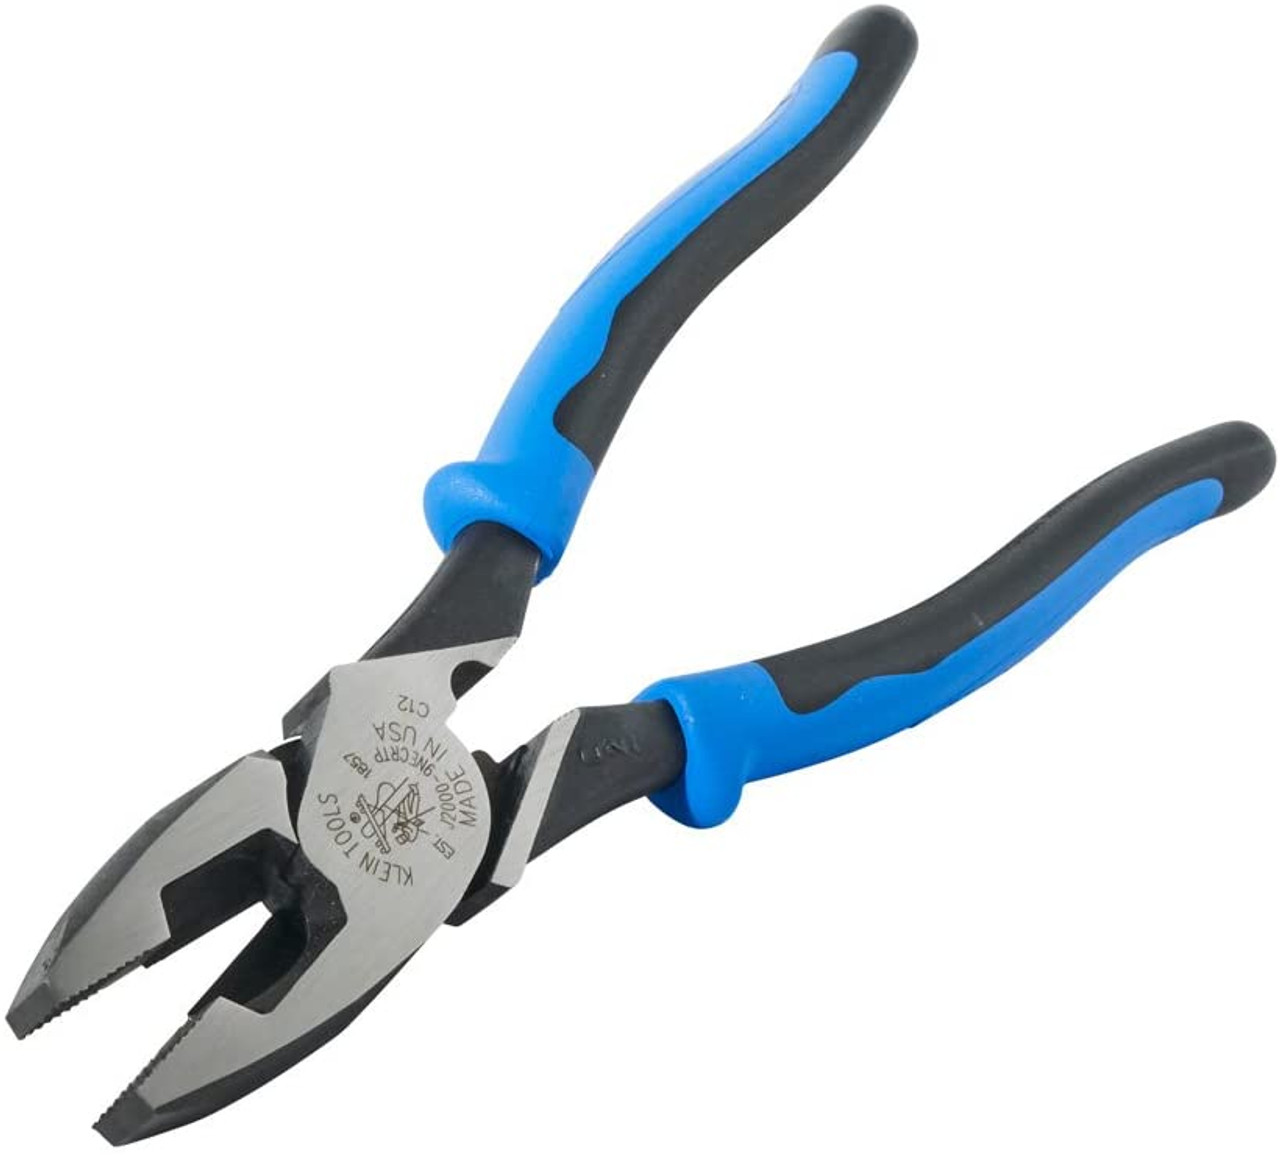 Klein Tools J203-8 Long Nose Side Cutting Pliers, 8